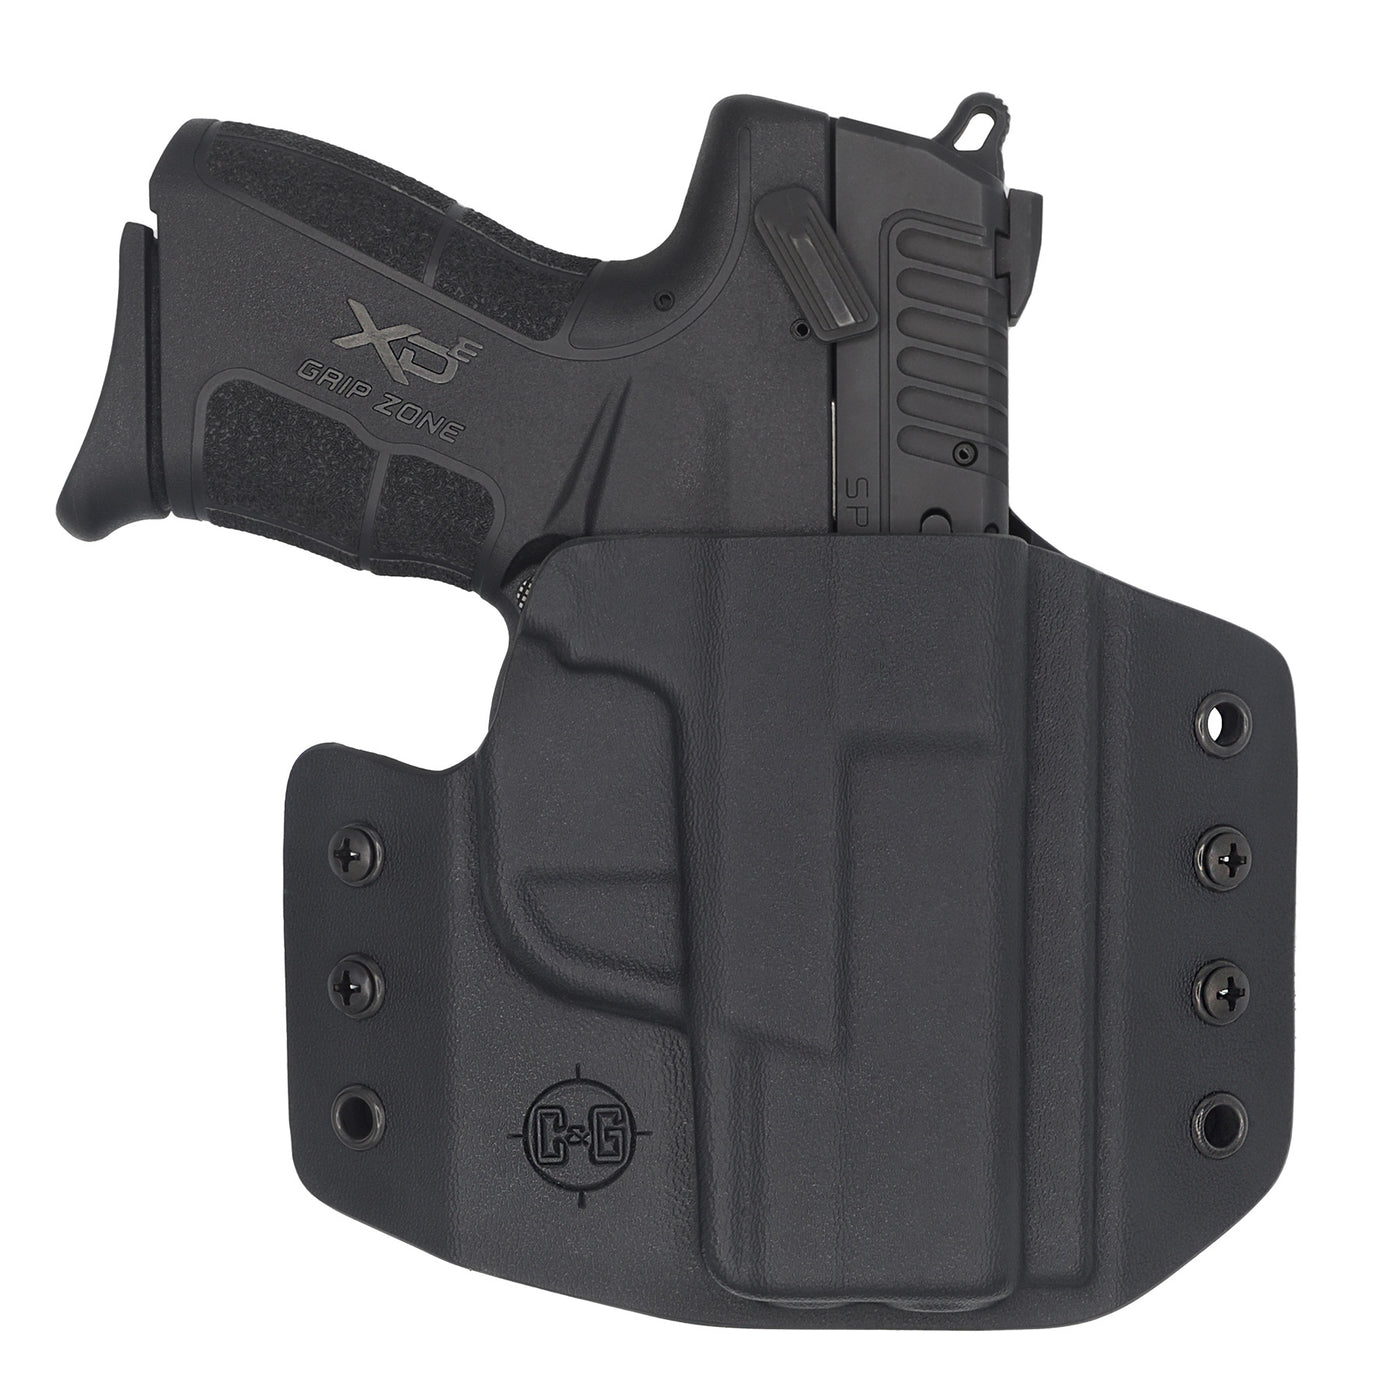 C&G Holsters custom OWB Covert Springfield XDe 3.3" in holstered position